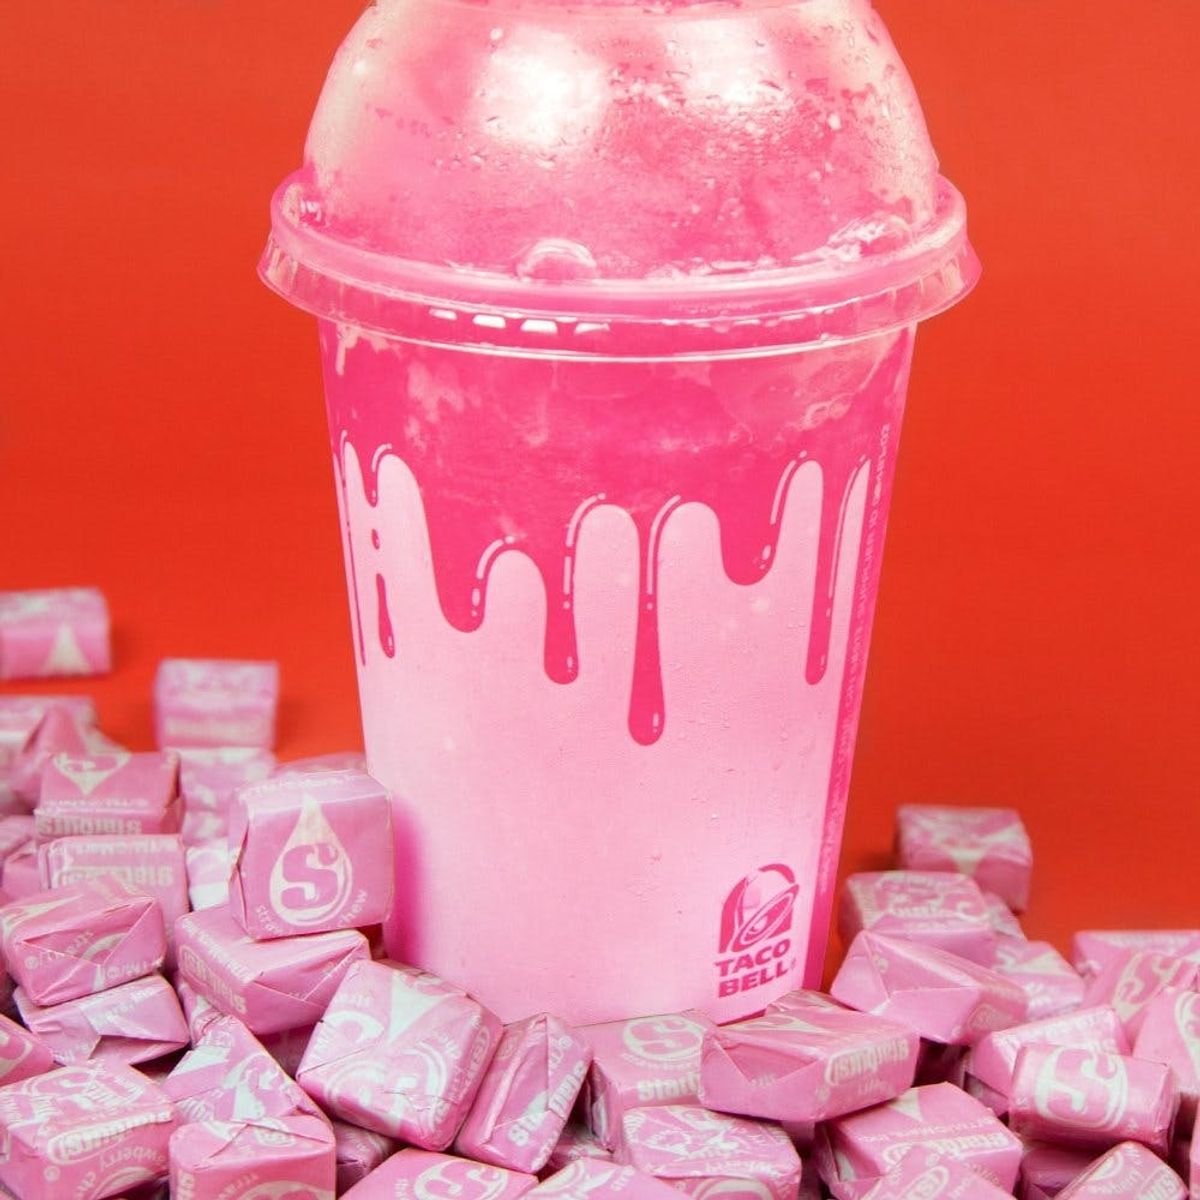 Starburst and Taco Bell Have Teamed Up to Make a Brand New Frozen Summer Drink